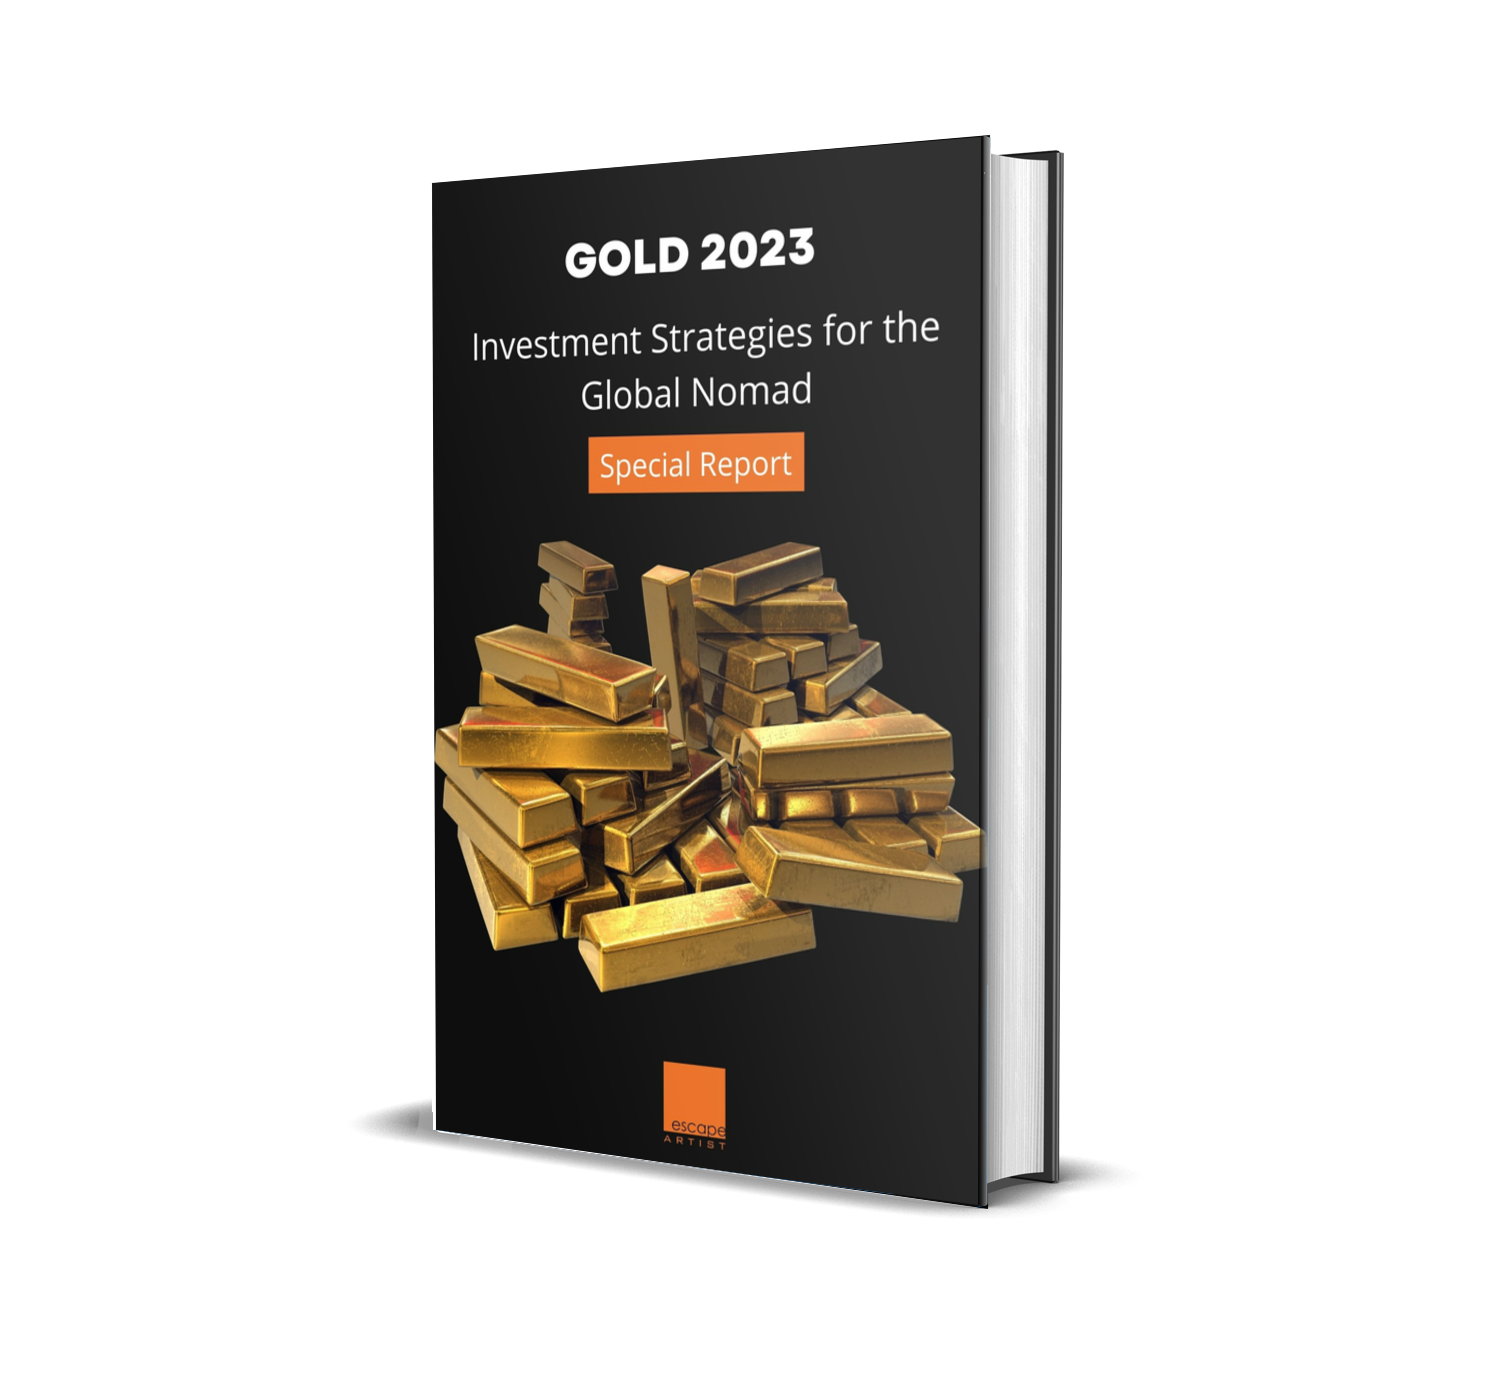 Gold 2023 – Investment Strategies for the Global Nomad